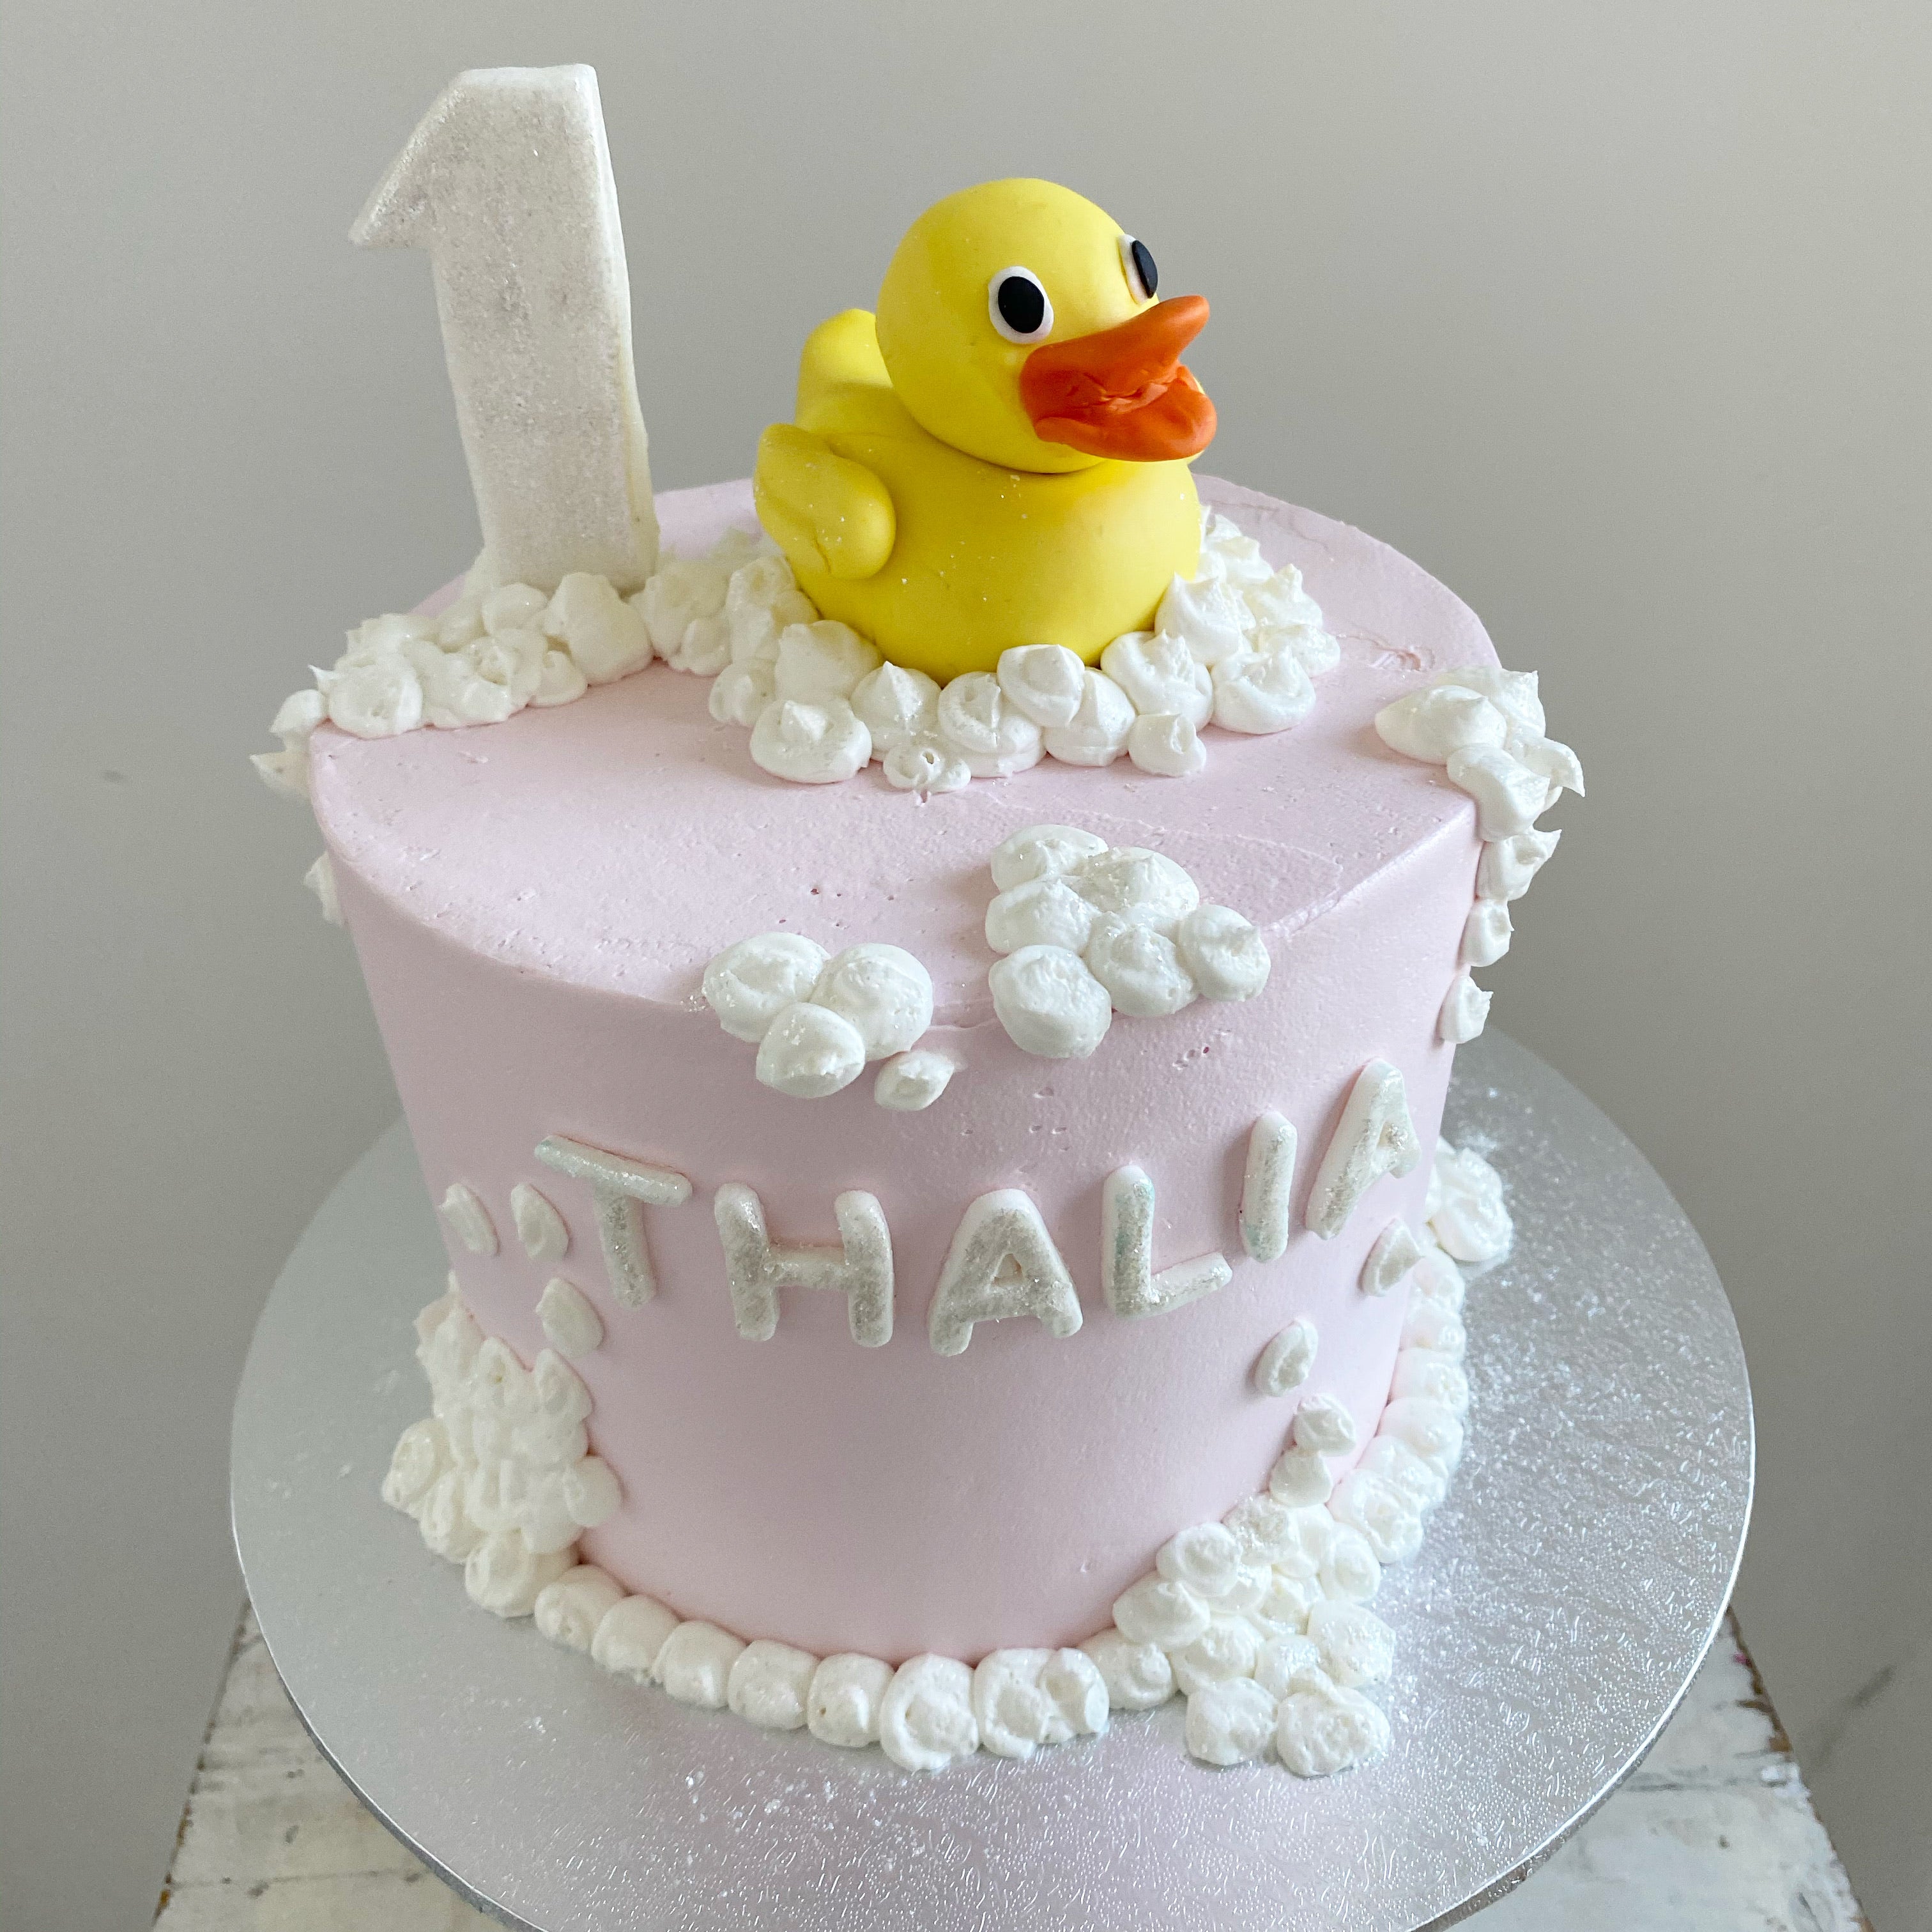 Rubber Duckie – Freed's Bakery